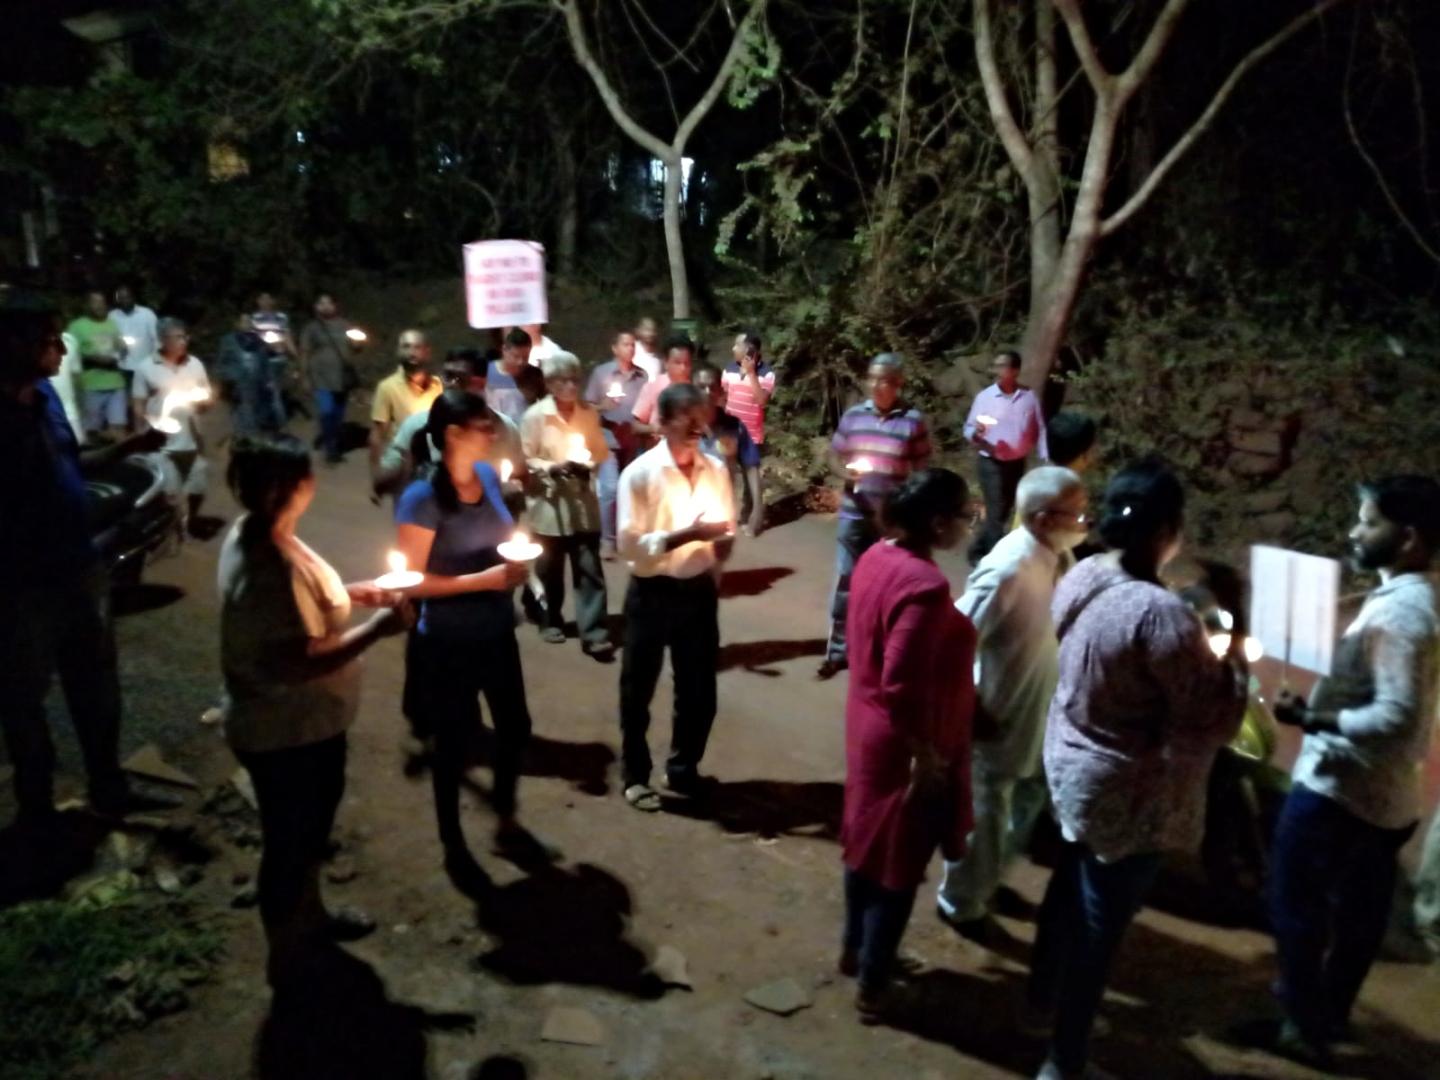 Assagao locals rally in silent candlelight march to oppose controversial nightclub